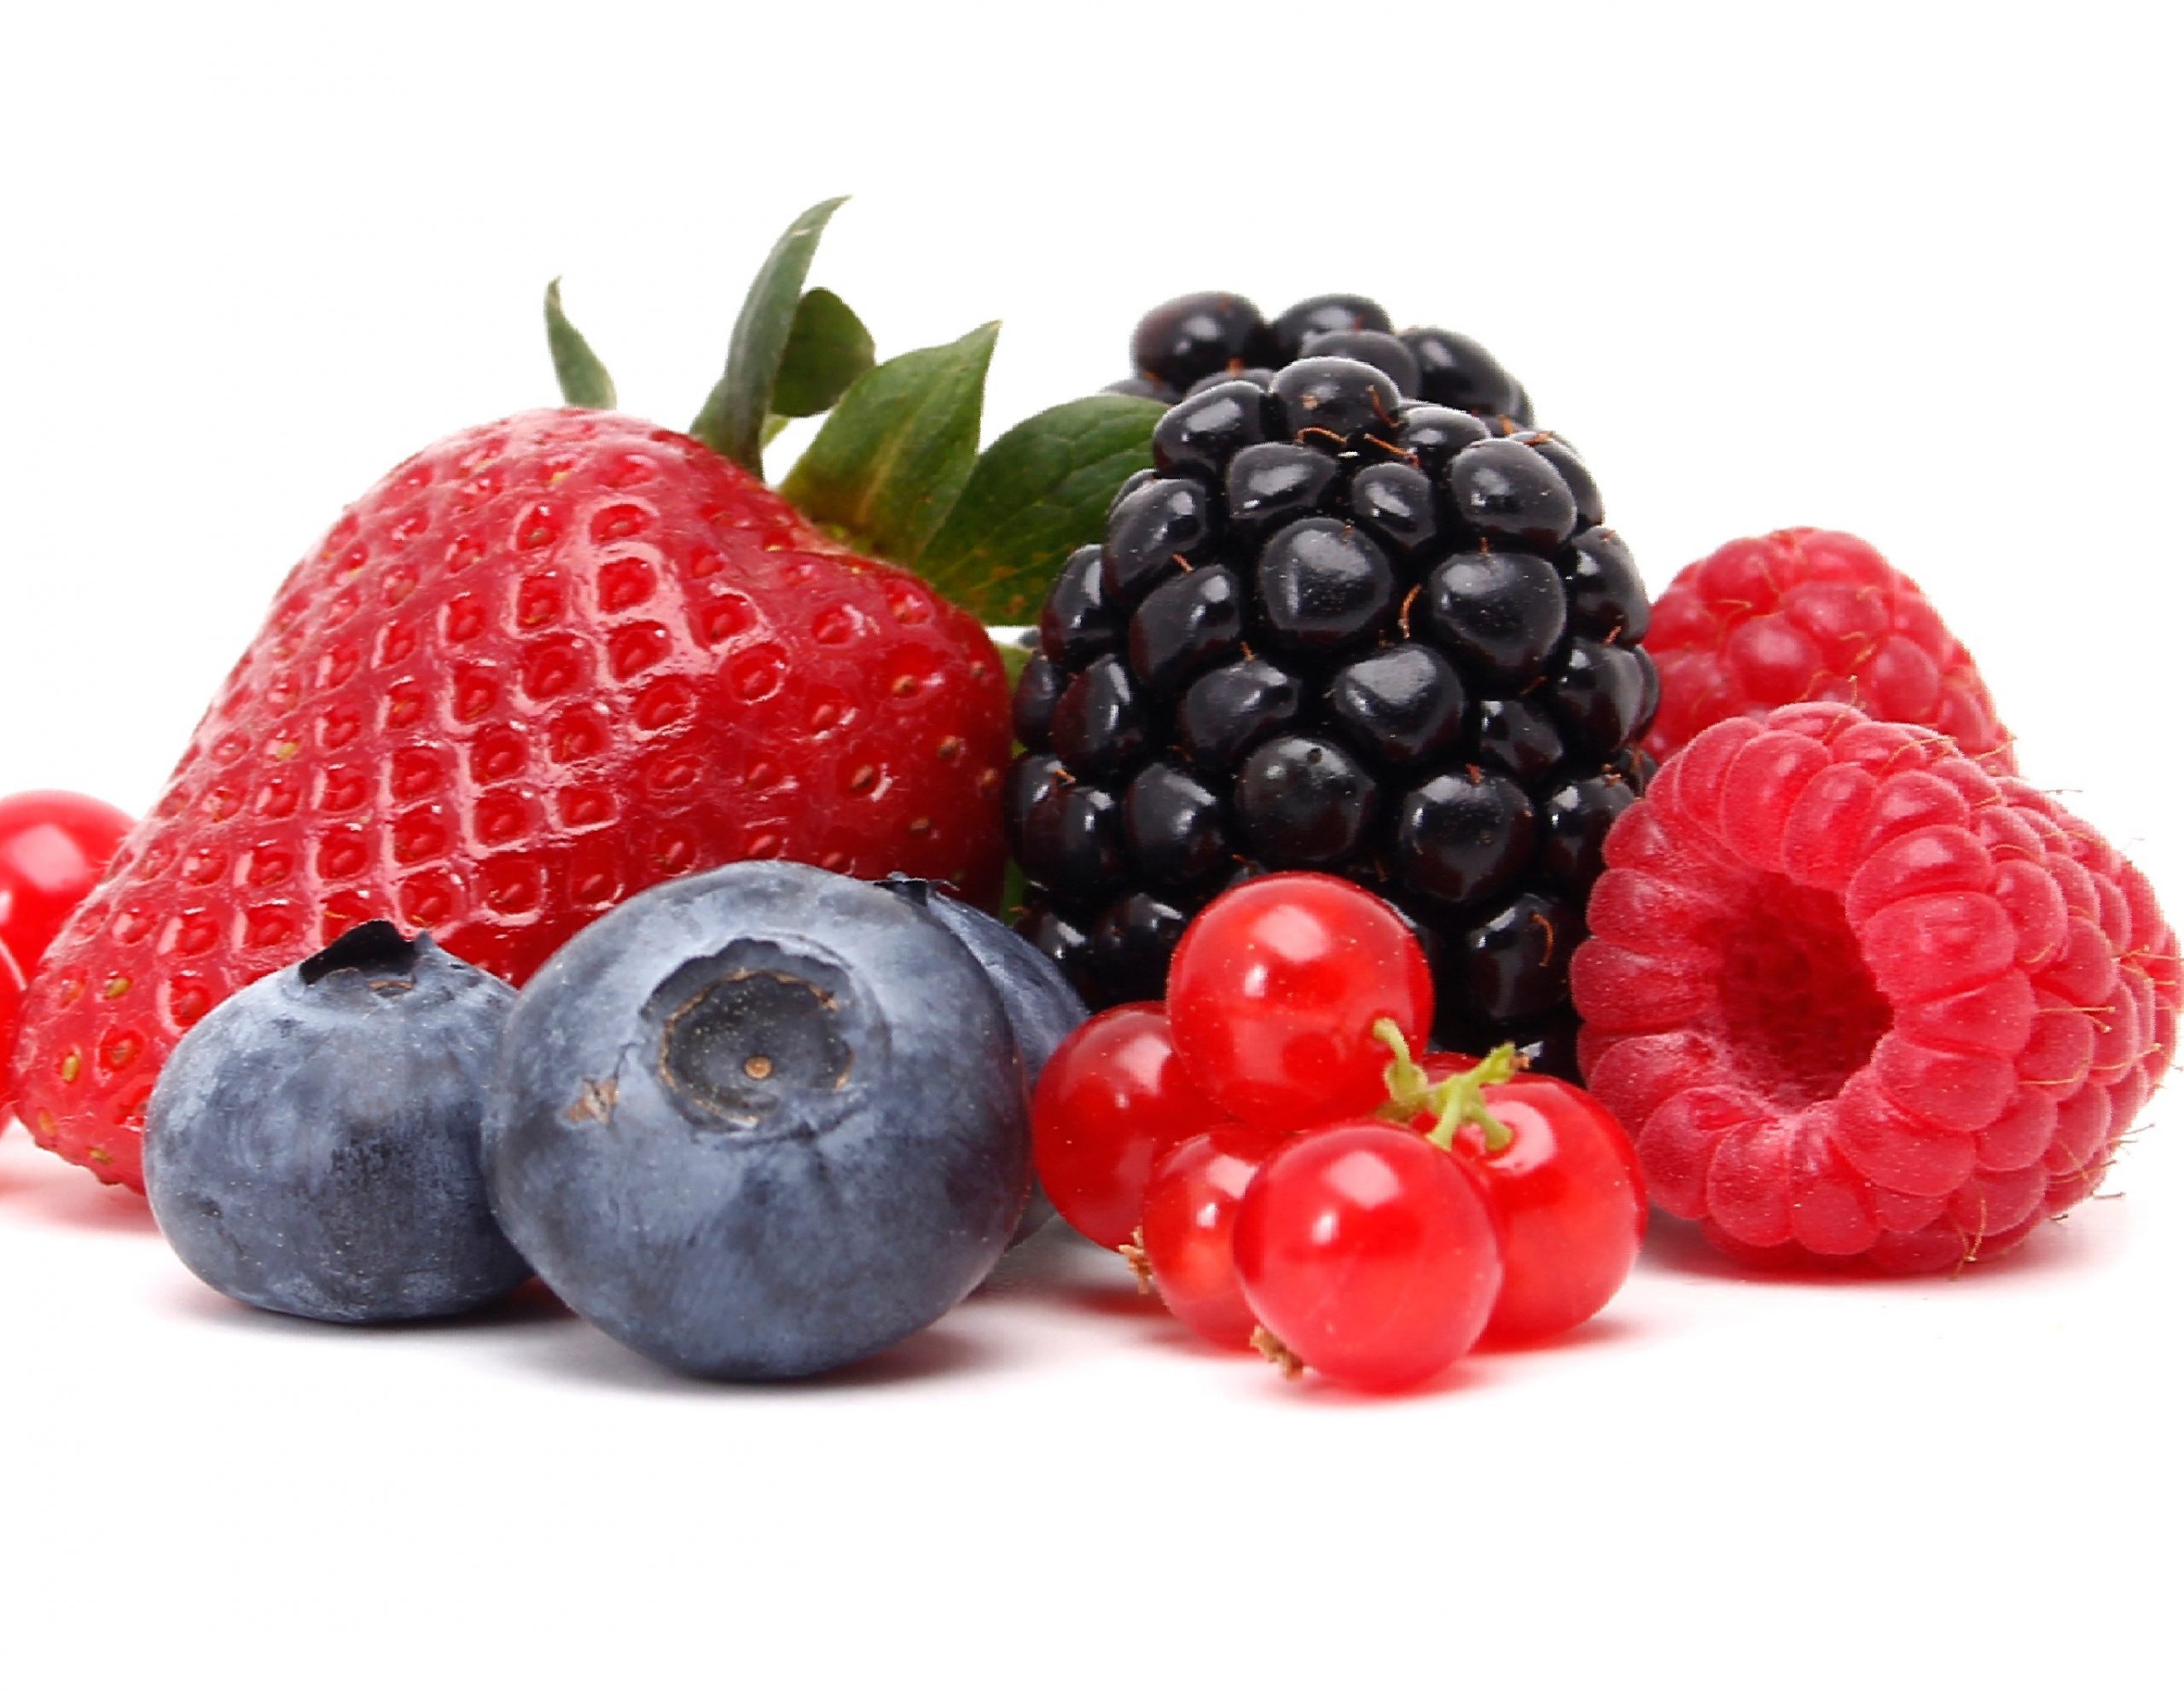 More than one in four shopping baskets sold by mySupermarket in the UK had berries in them last May–August. The average of nearly 26% for those warmer months – up from about 18.5% over twelve months – shows the seasonal nature of berry consumption.